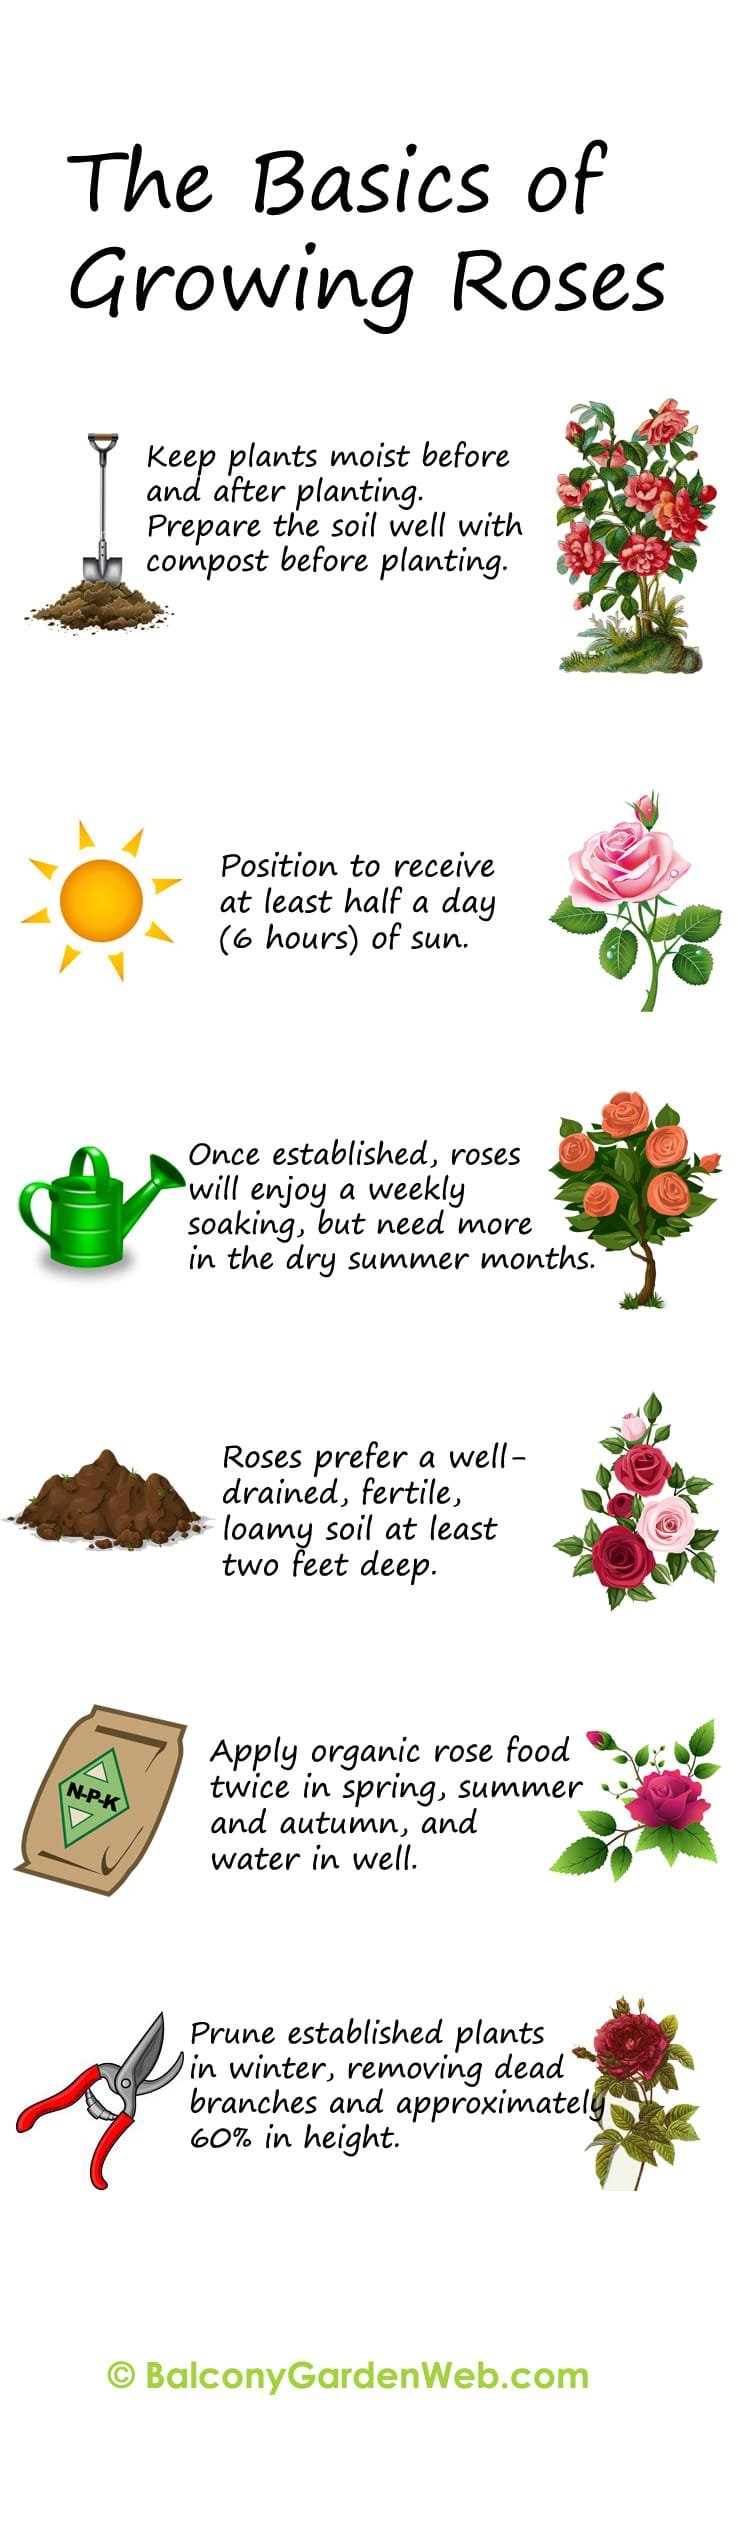 The basics of growing and planting roses. More amazing info in this post.